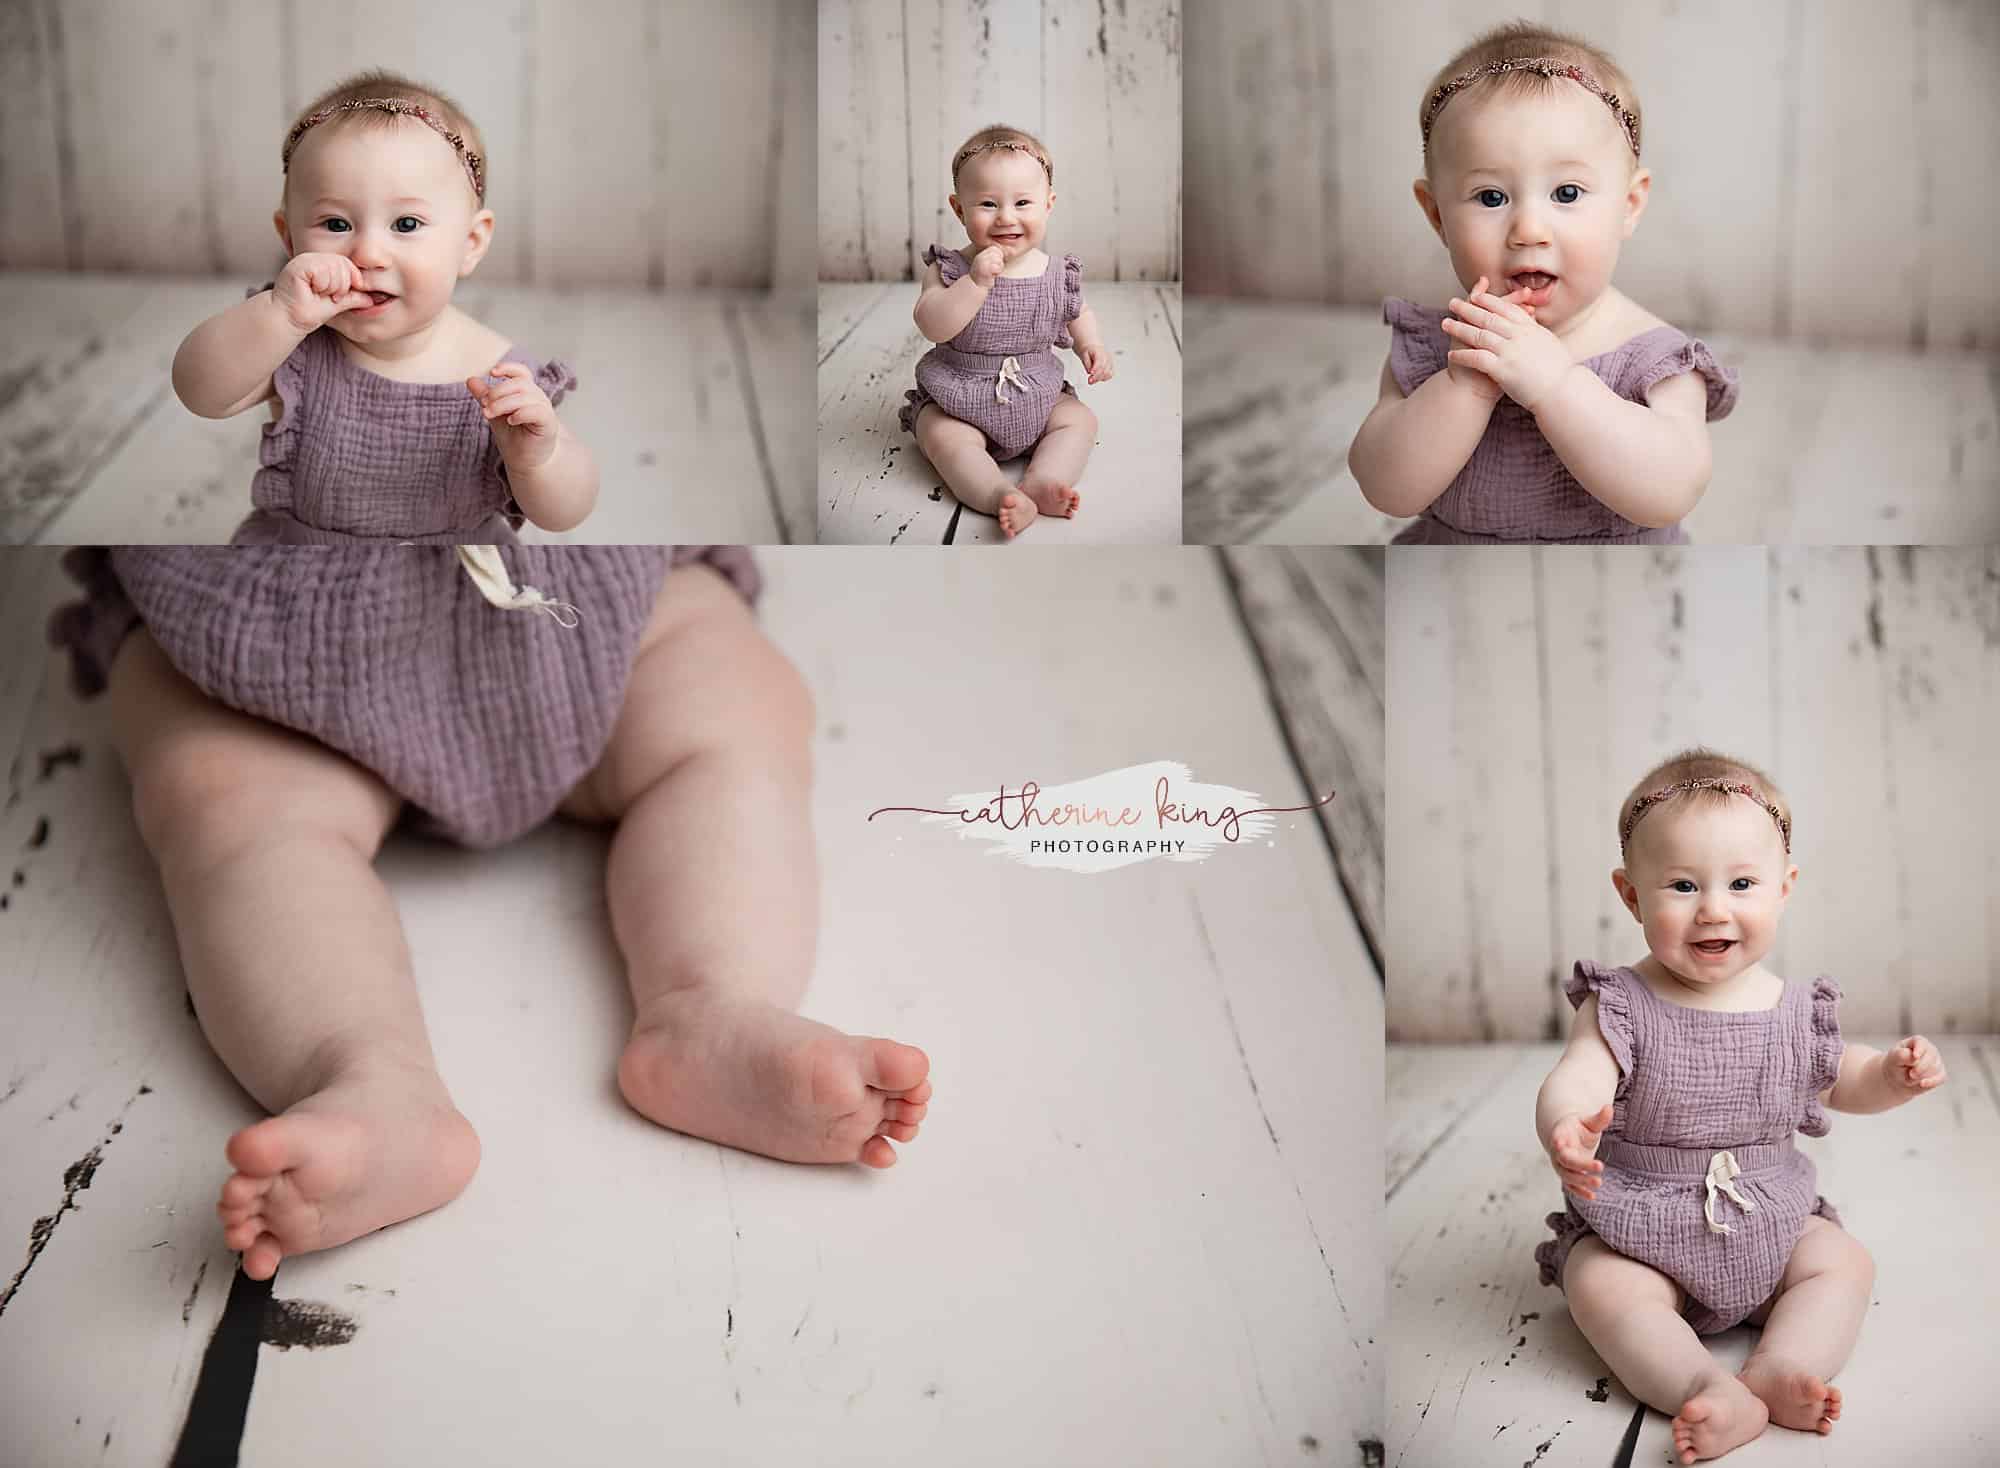 6 month old baby photography session by catherine king photography a new haven county newborn photographer in ct